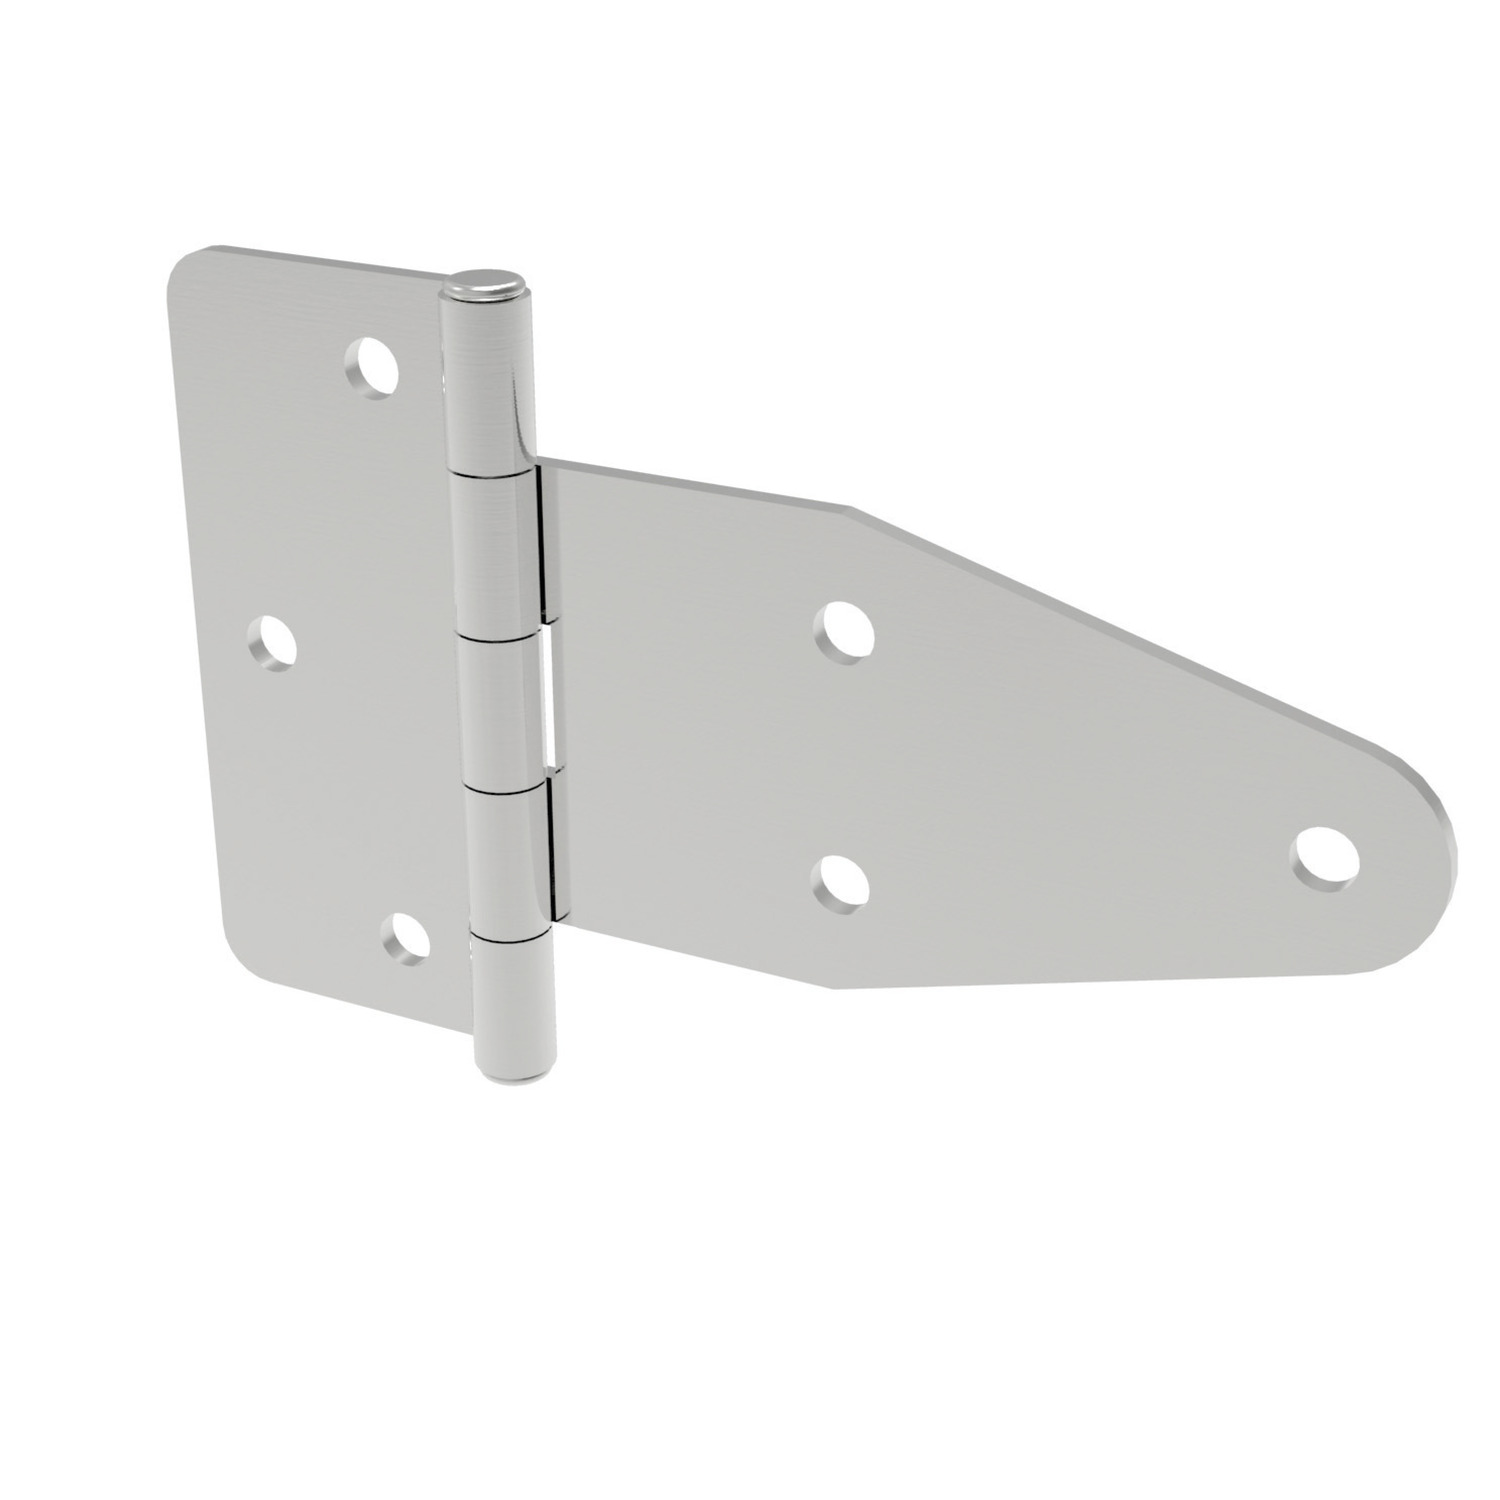 Surface Mount - Leaf Hinges Polished stainless steel (AISI 304) surface mount leaf hinges with screw mounts. Ideal for plain or flush mounted, isolated heavy doors or electrical panels. Operates at 180°.